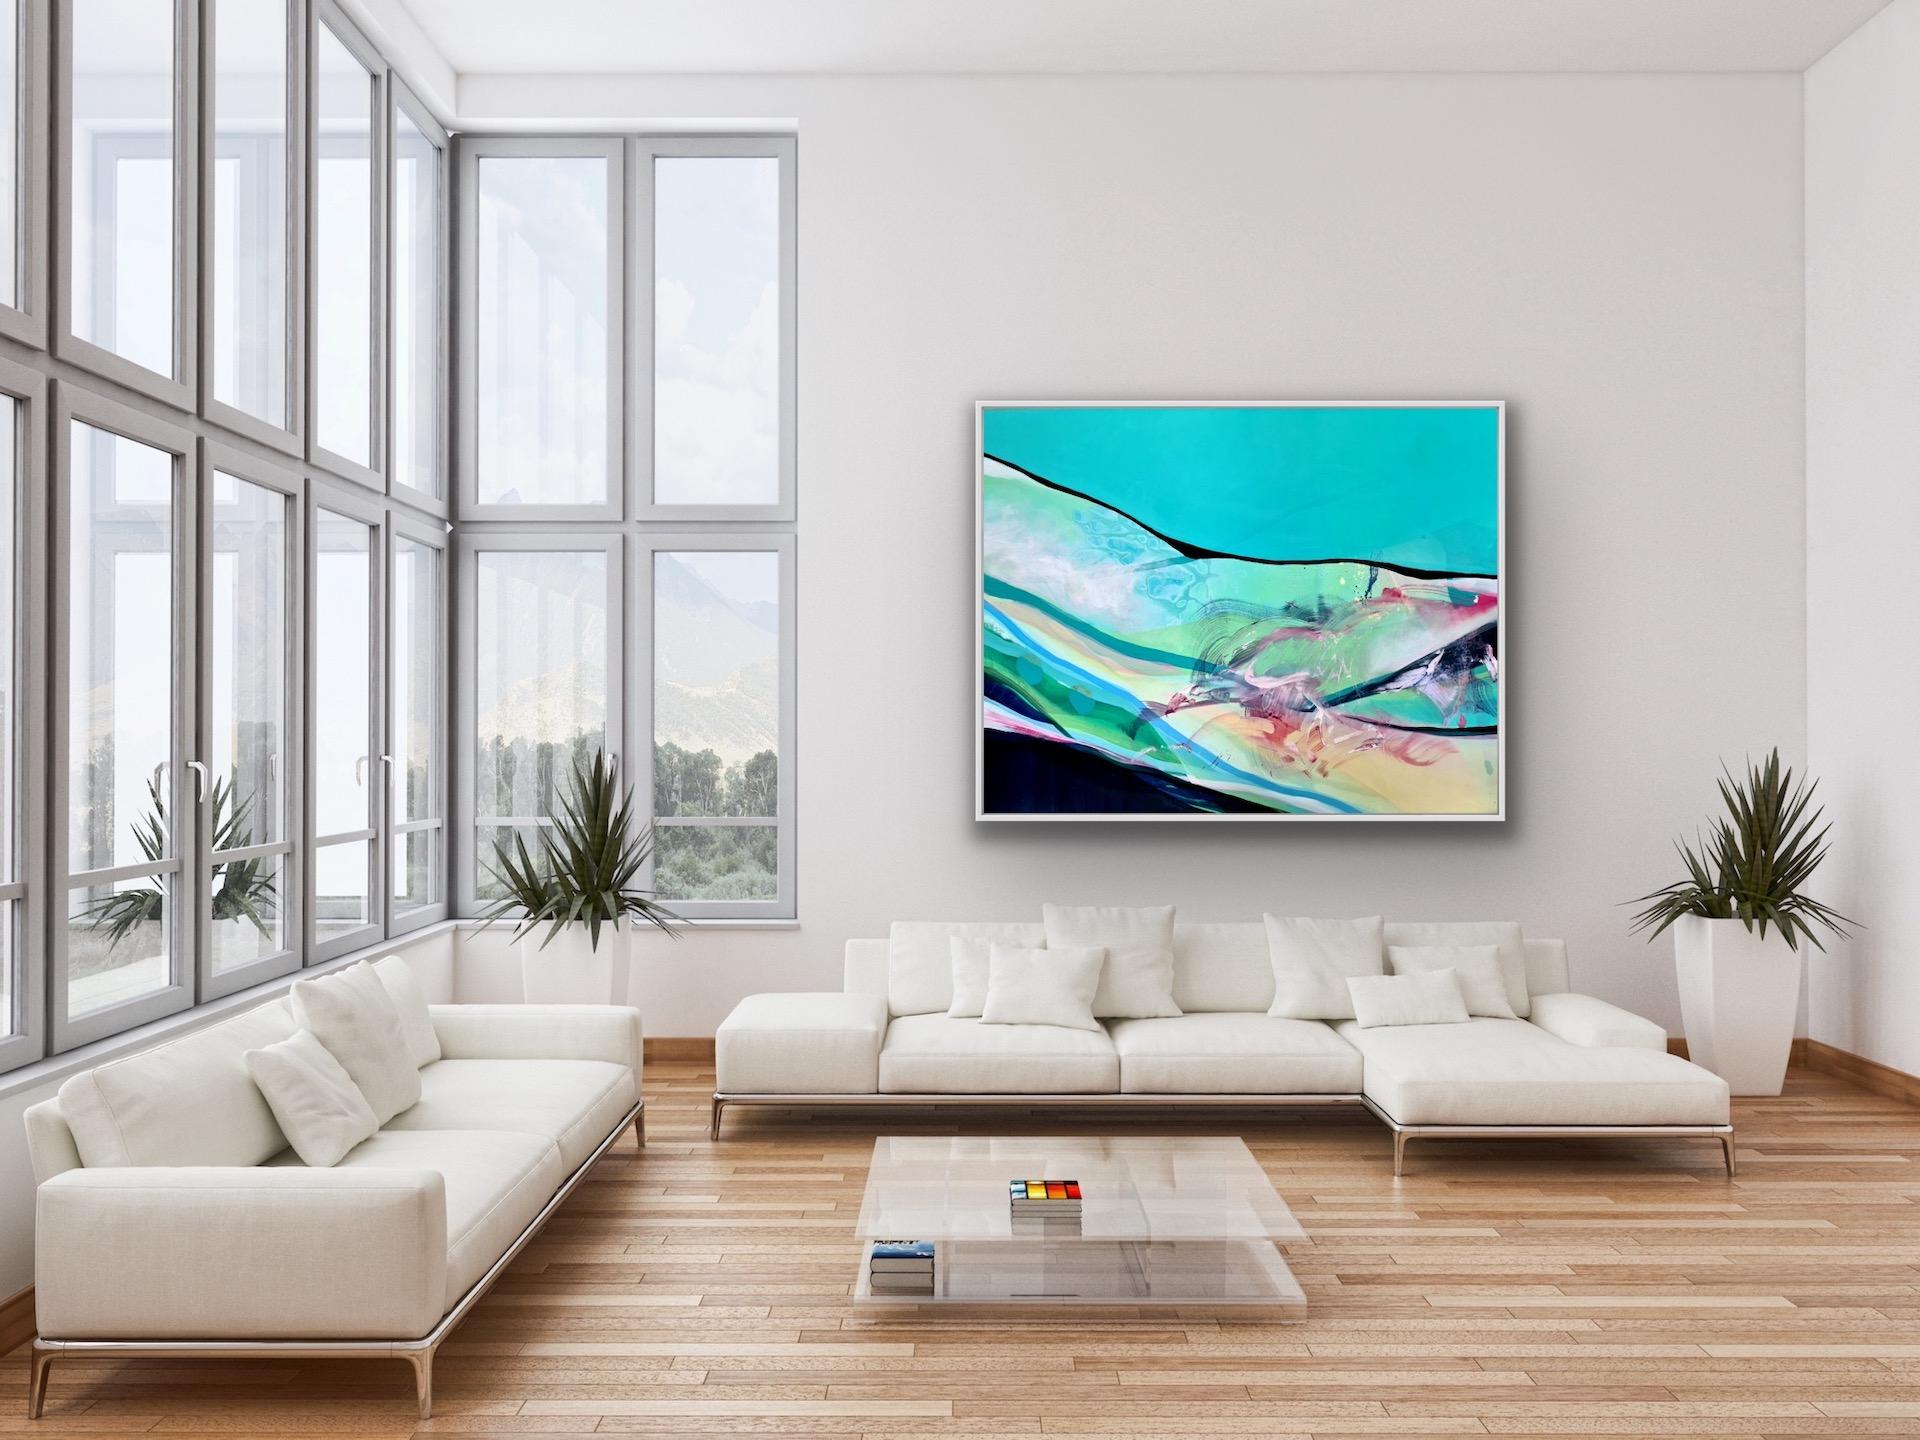 Claire Chandler
Far Away From Here
Original Abstract Painting
Image Size: H 127cm x W 157cm
Sold Unframed
(Please note that in situ images are purely an indication of how a piece may look).

Claire Chandler was born in Hereford yet spent much of her